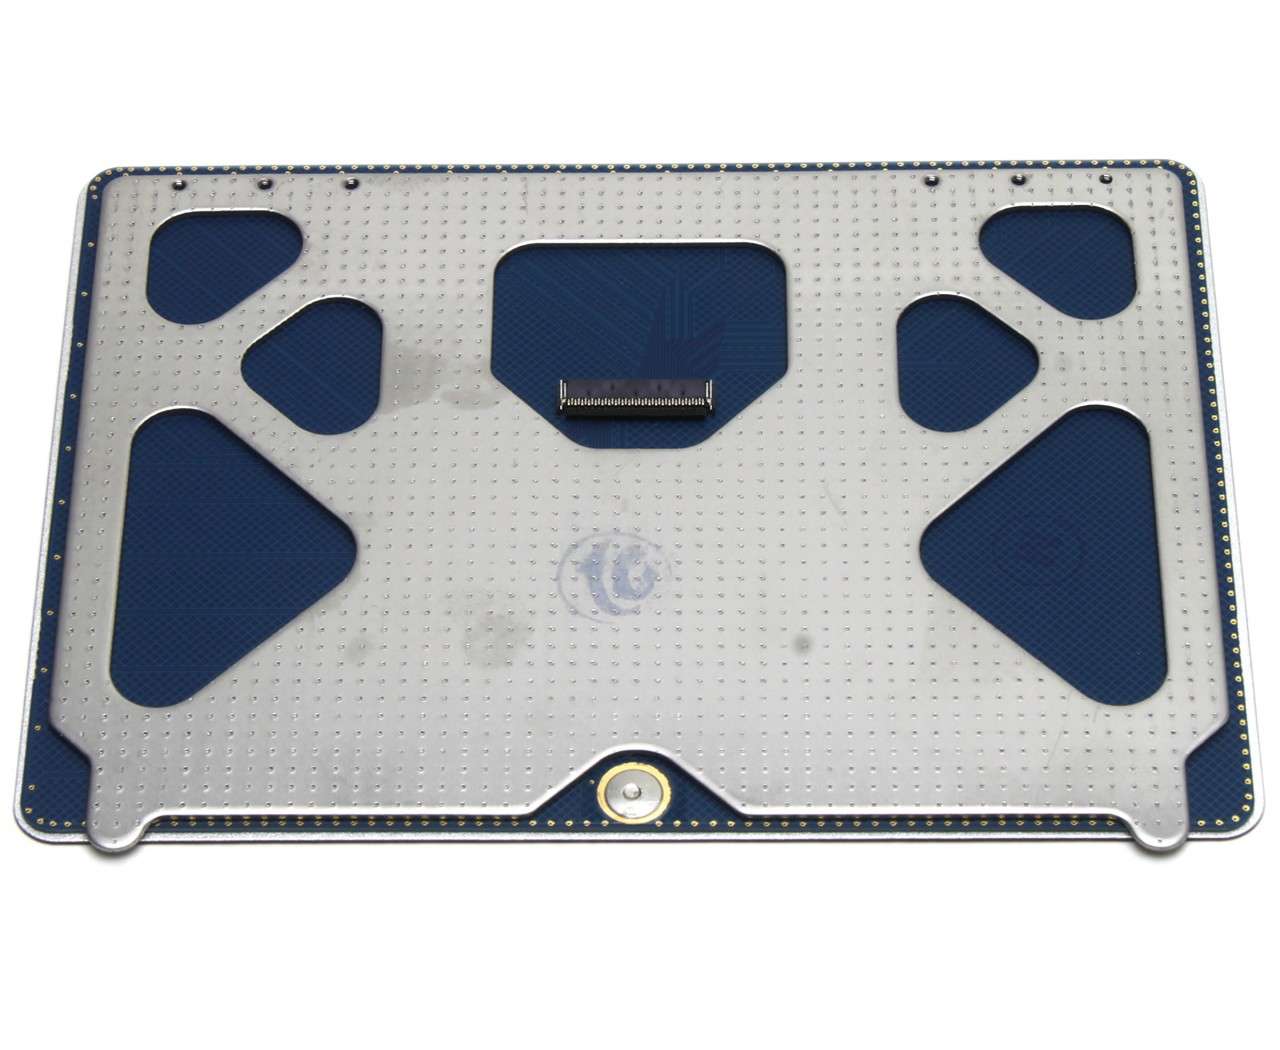 Touchpad Apple Macbook Pro Unibody A1286 2008 Trackpad image0